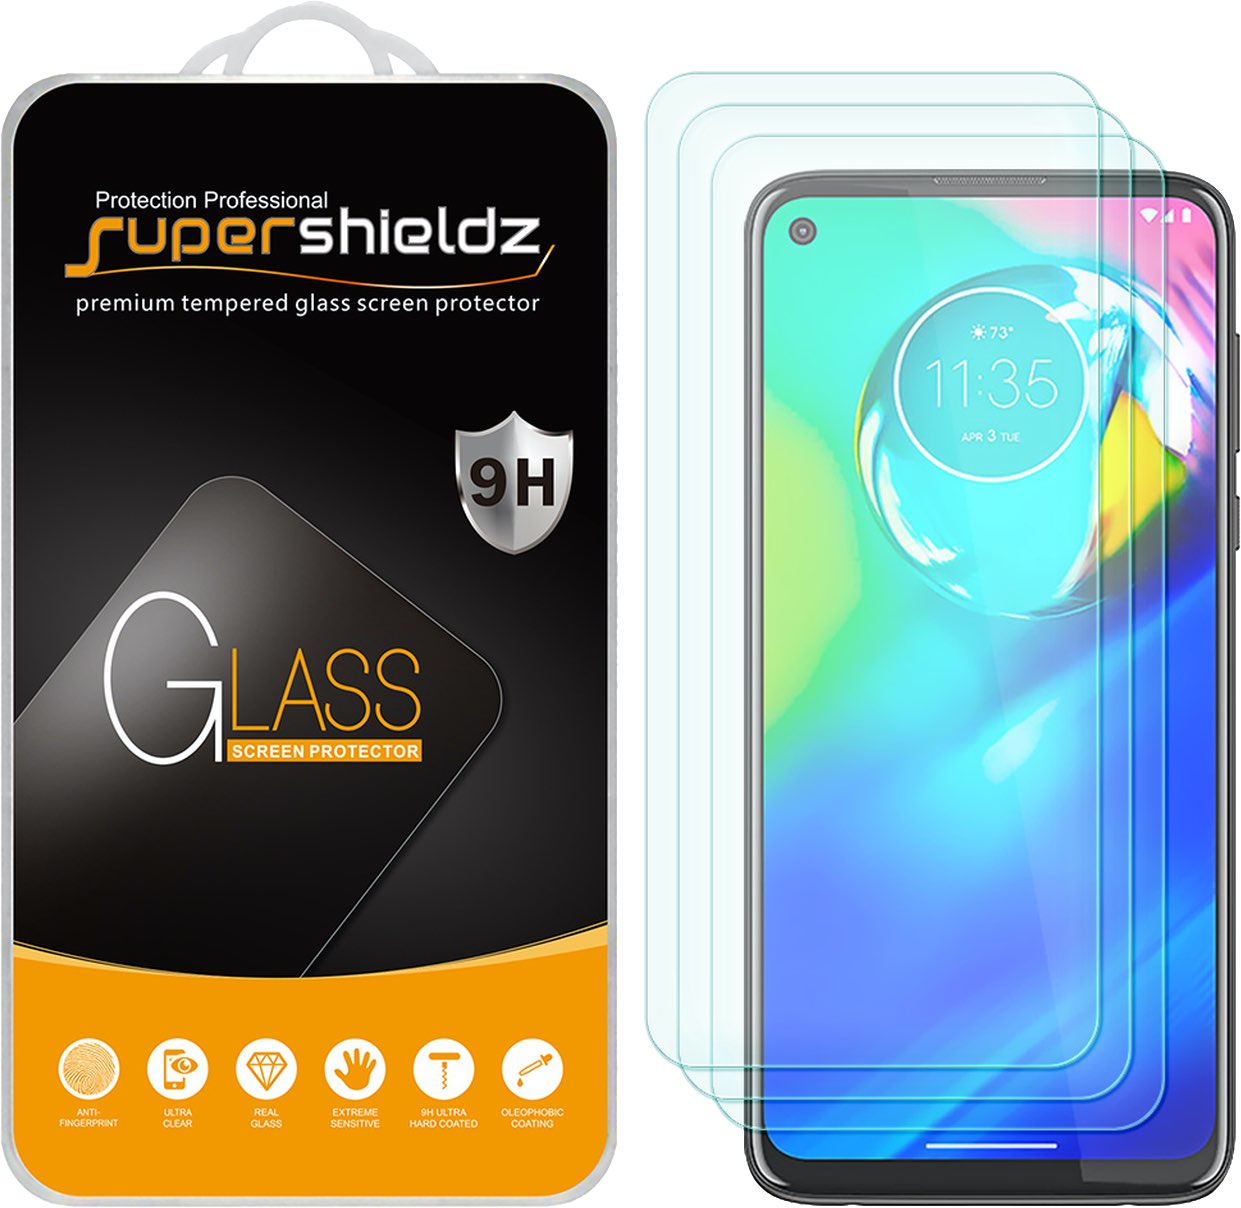 Best Moto G Power (2020) screen protectors 2021 Android